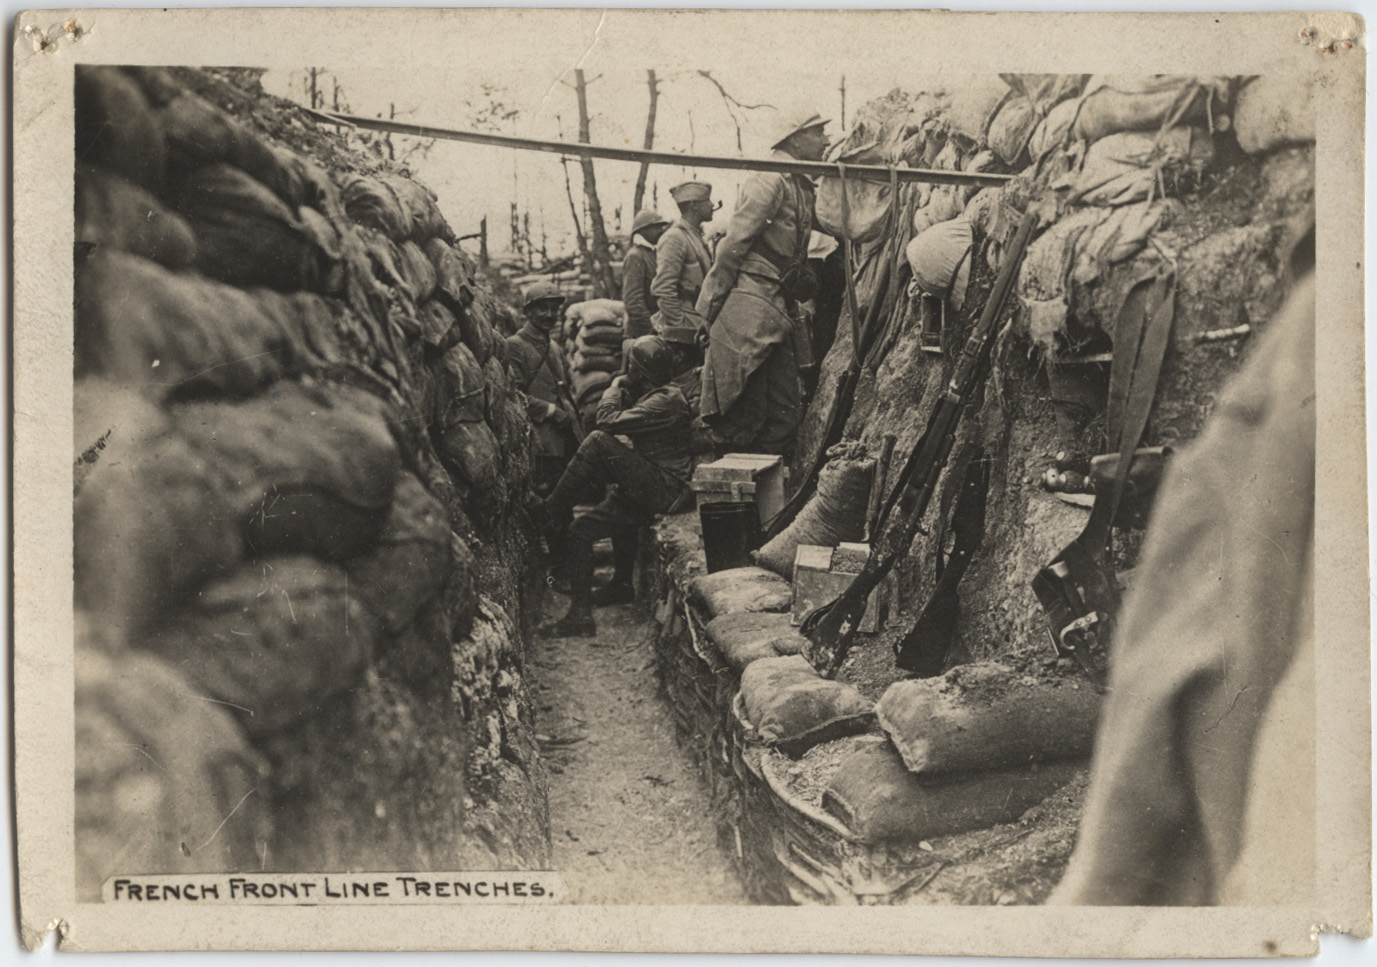 Black and white photograph. Several soldiers in uniform look out over the edge of a trench lined with sandbags